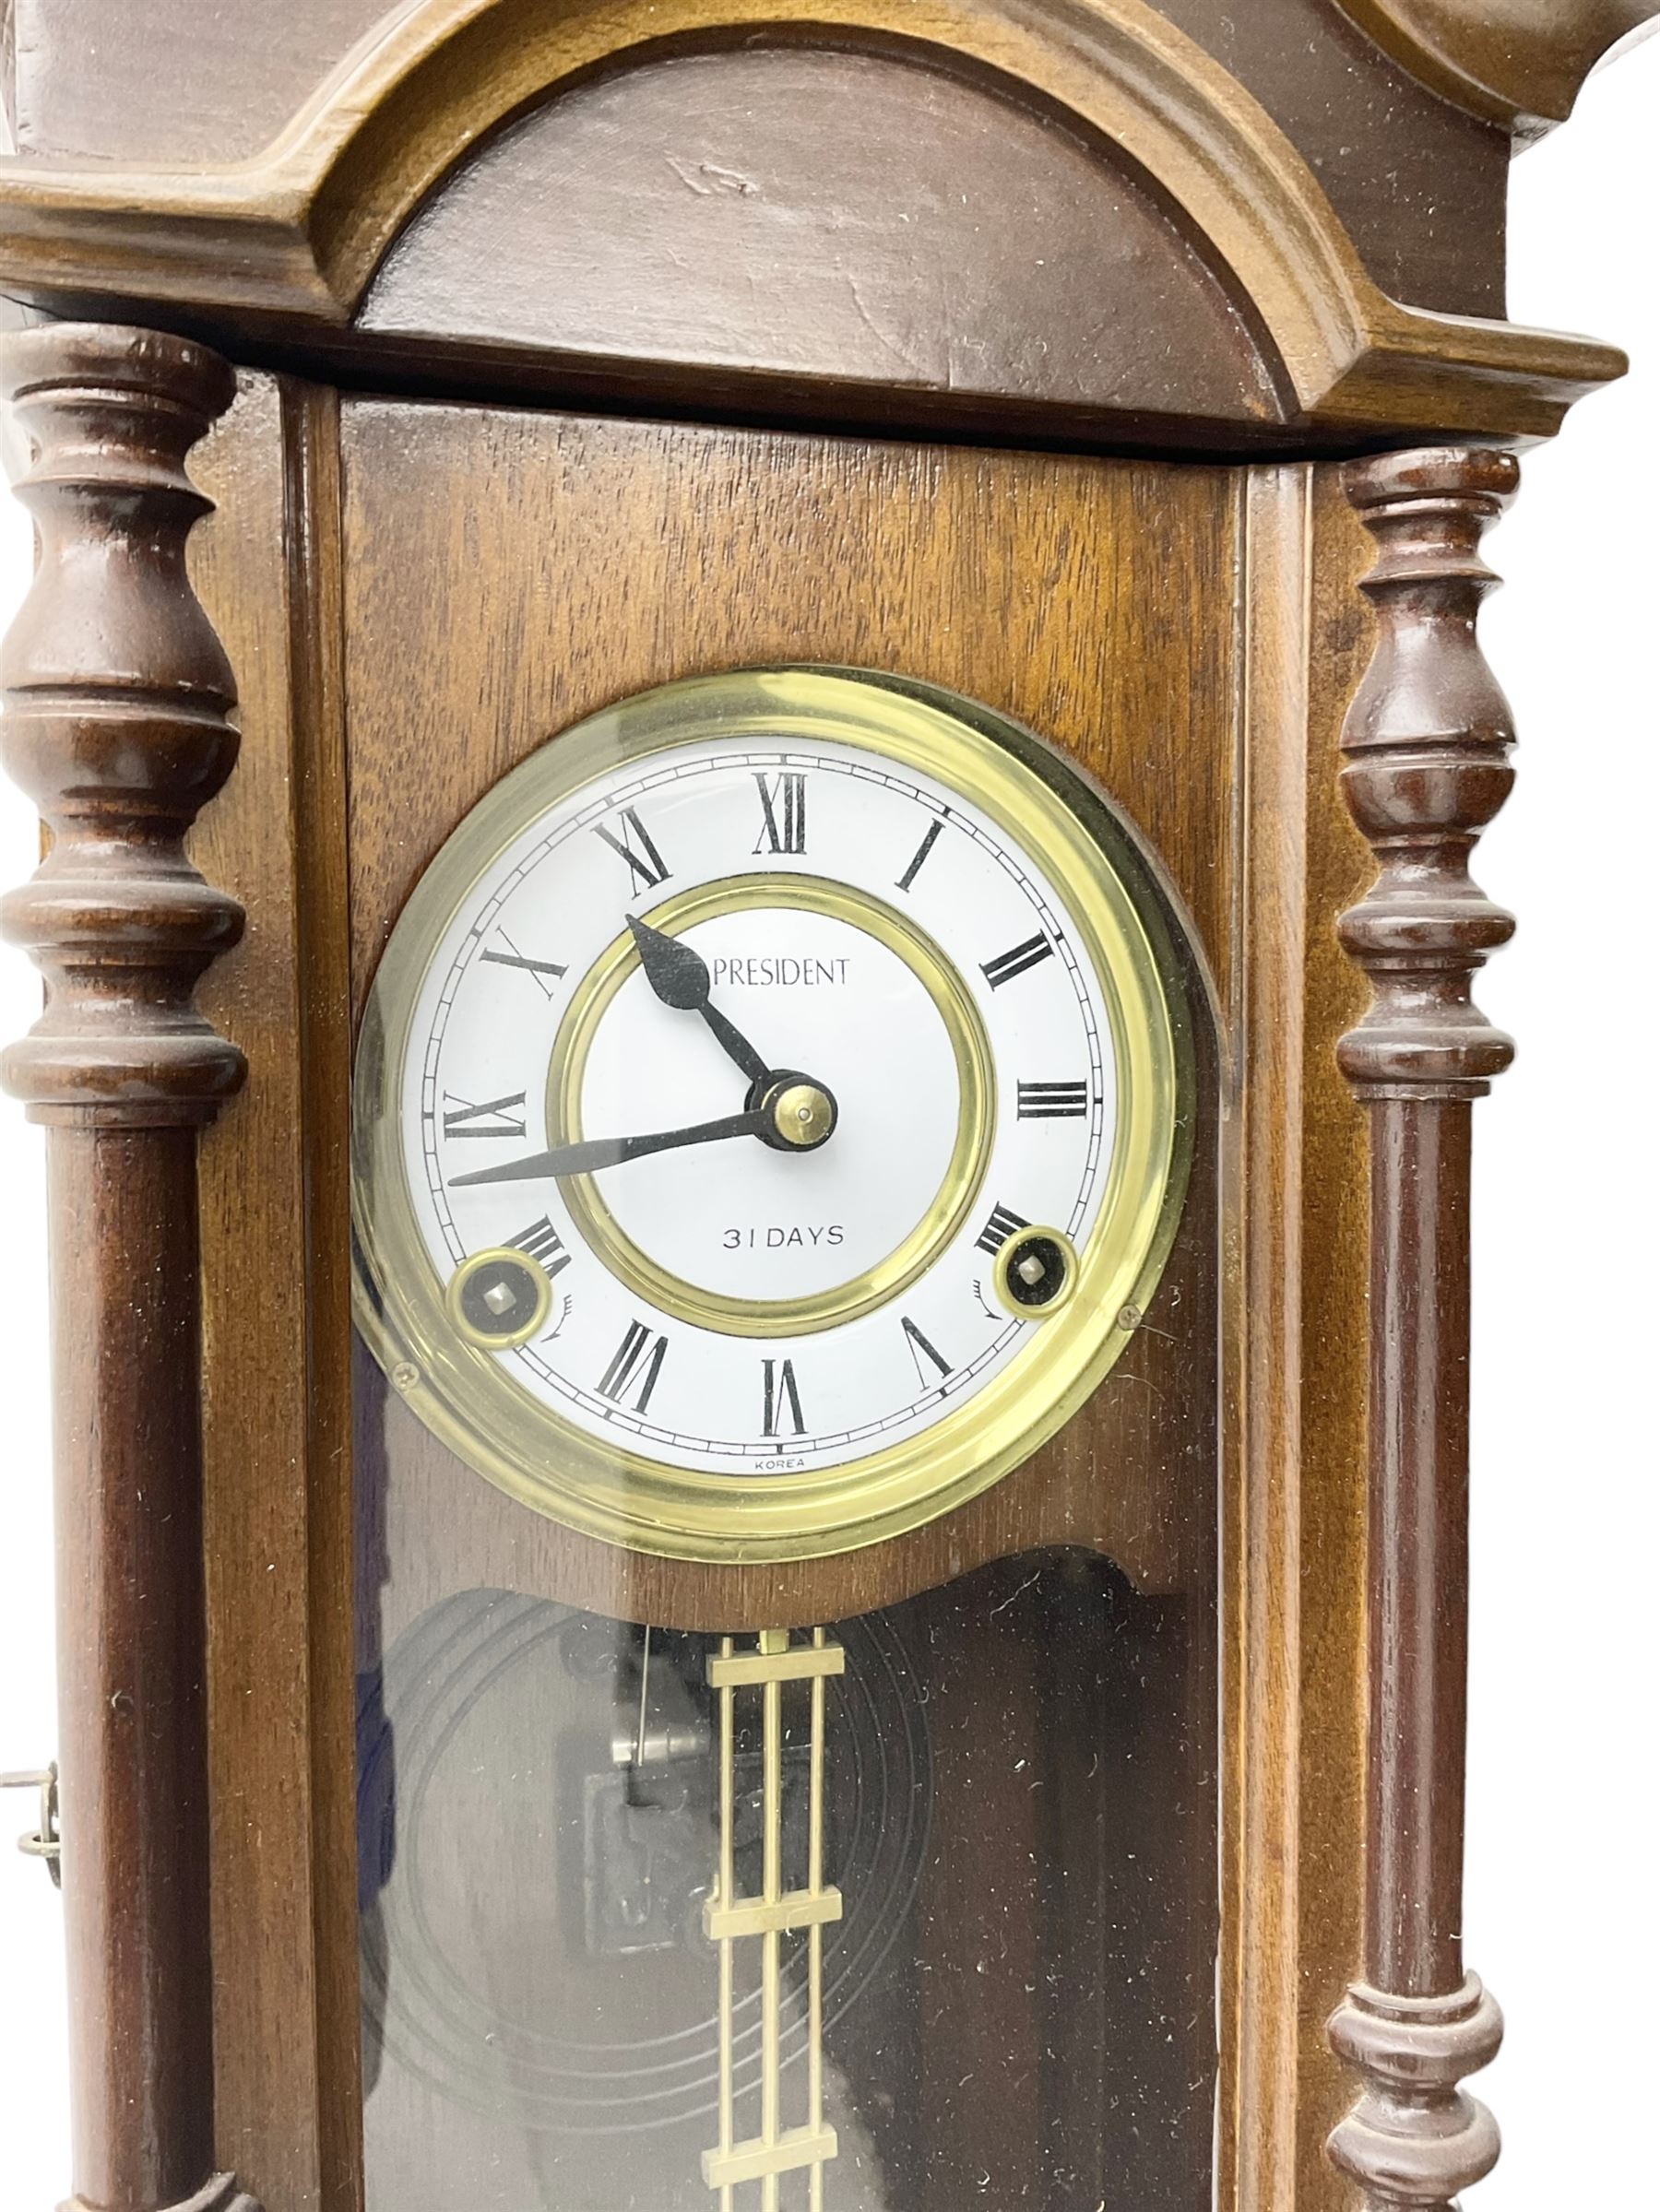 Continental - 31day spring driven wall clock in a mahogany case - Image 2 of 4